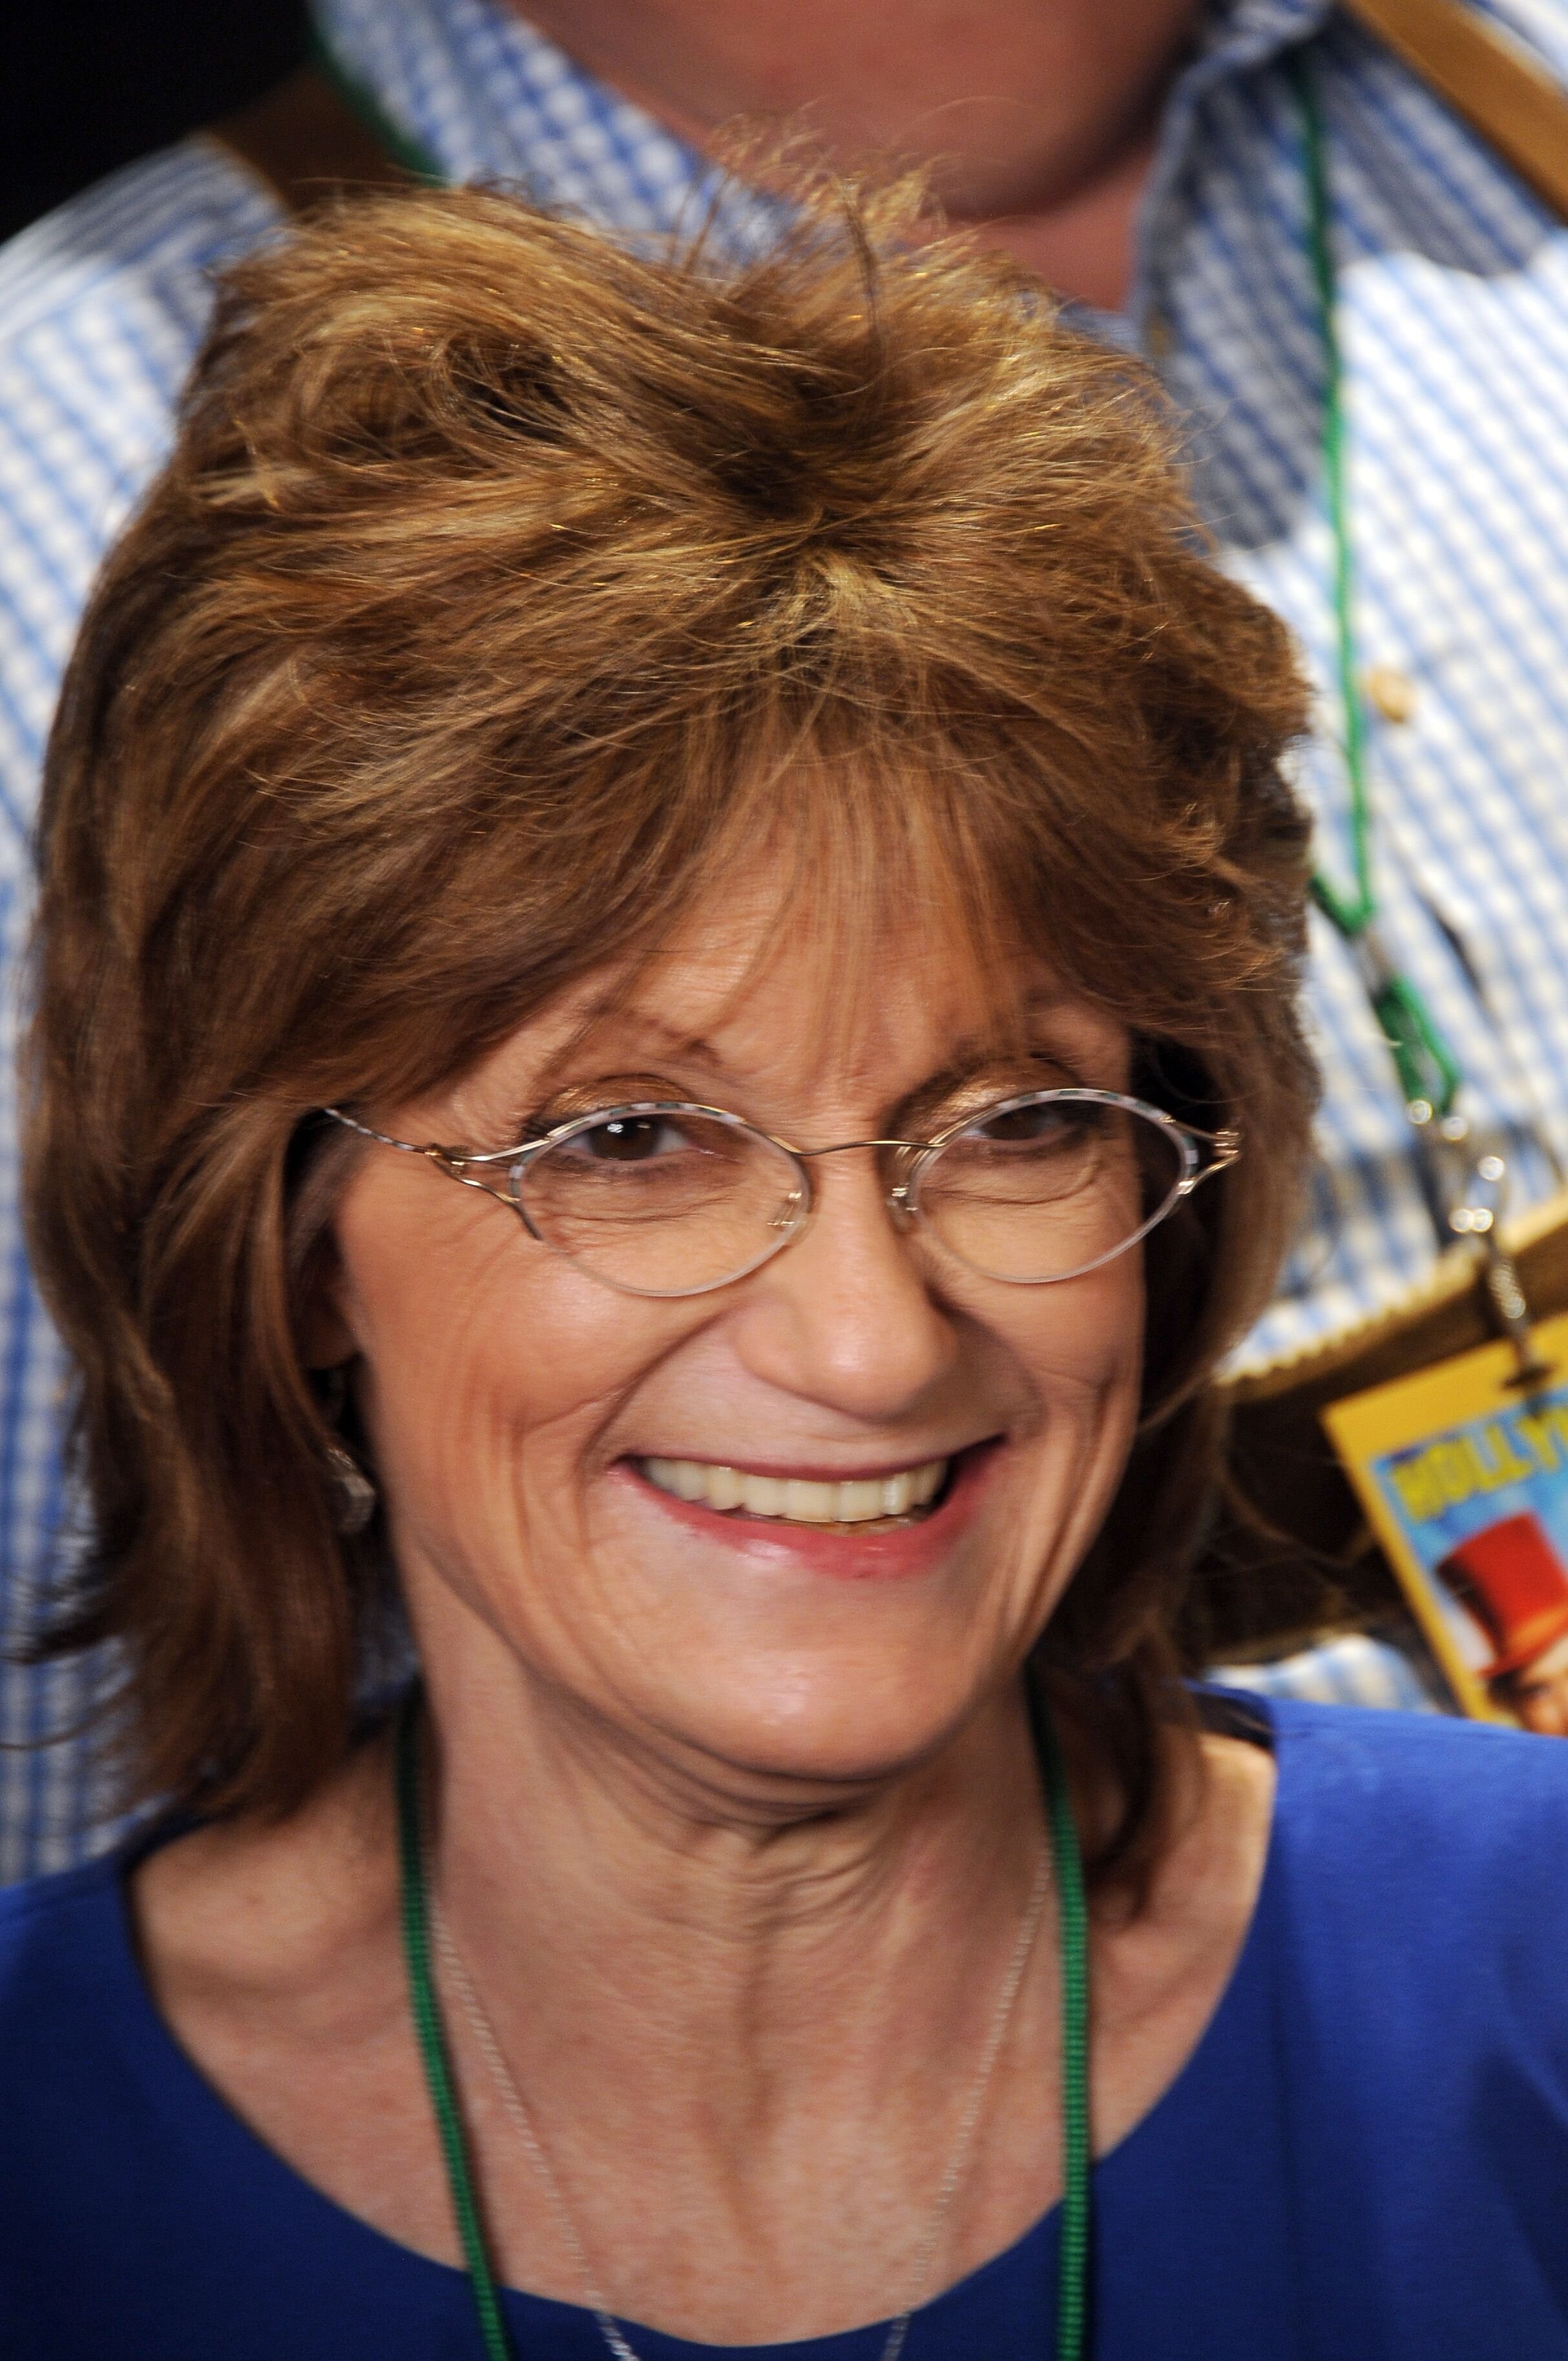  Actress Denise Nickerson at the The Hollywood Show held at Westin Los Angeles Airport on July 19, 2014 in Los Angeles, California. | Getty Images